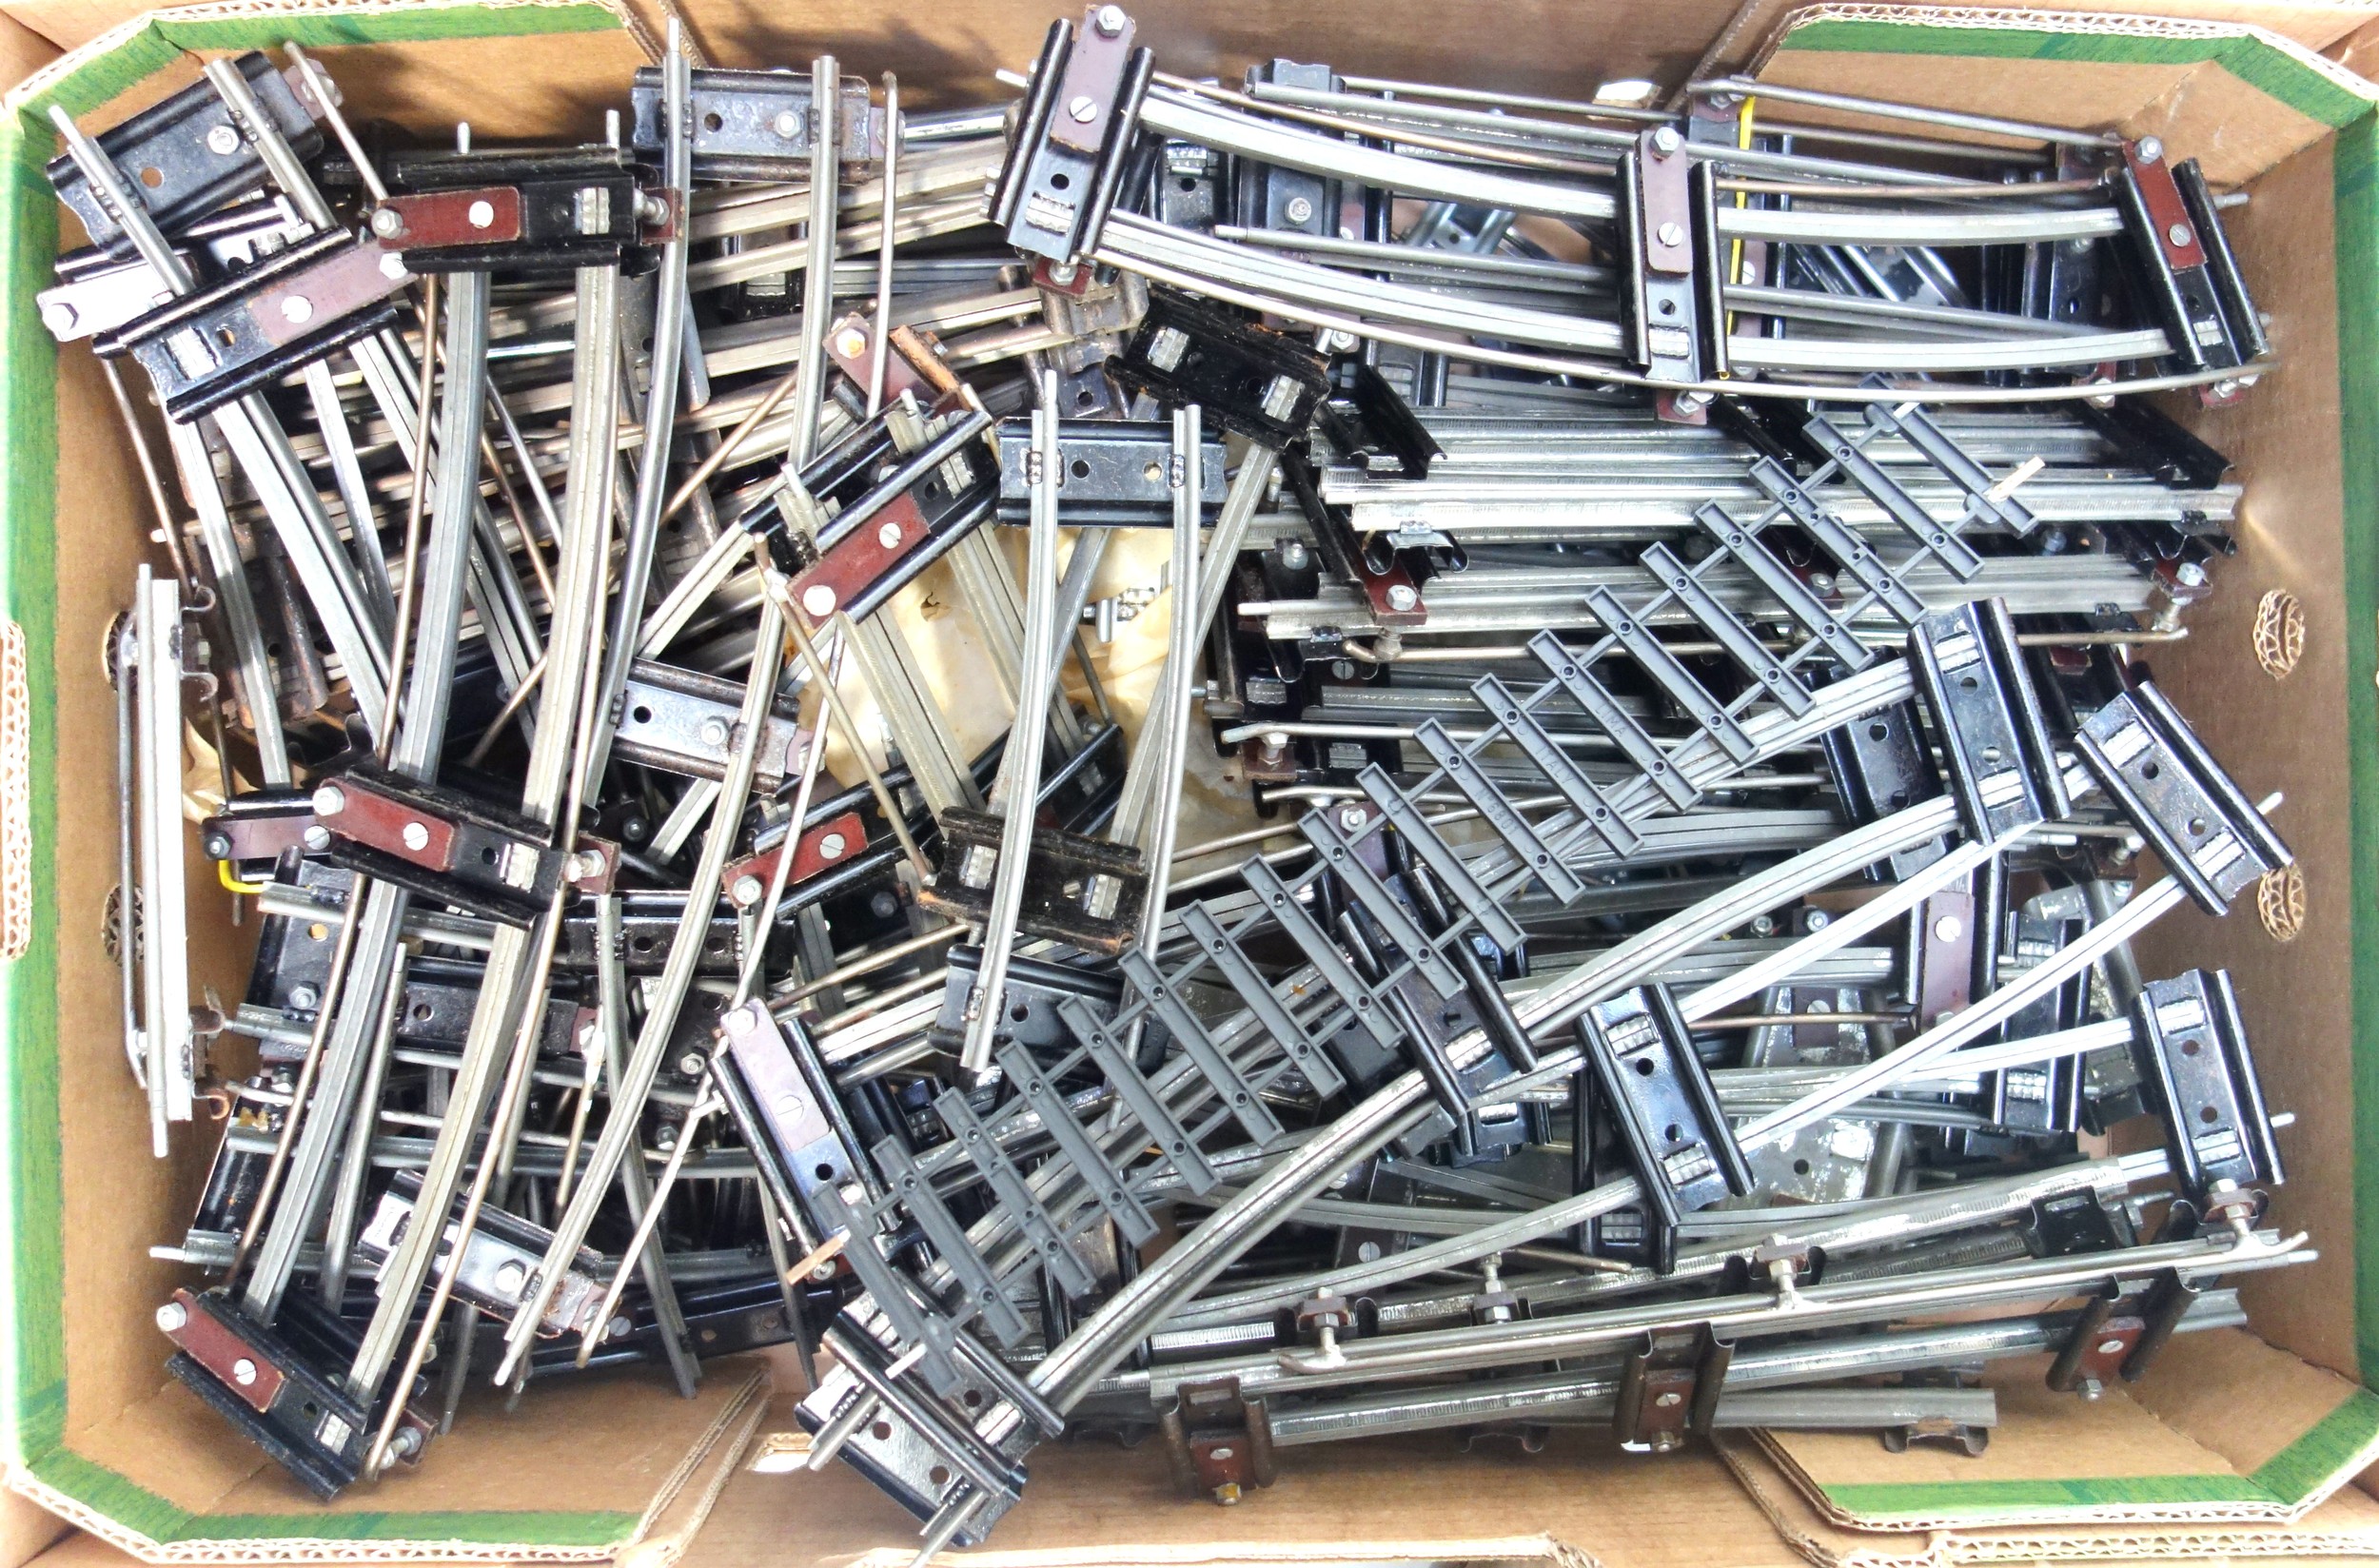 Large quantity of loose track, mainly Tri-ang, OO Gauge and O Gauge, catenary, tools, accessories, - Image 3 of 9